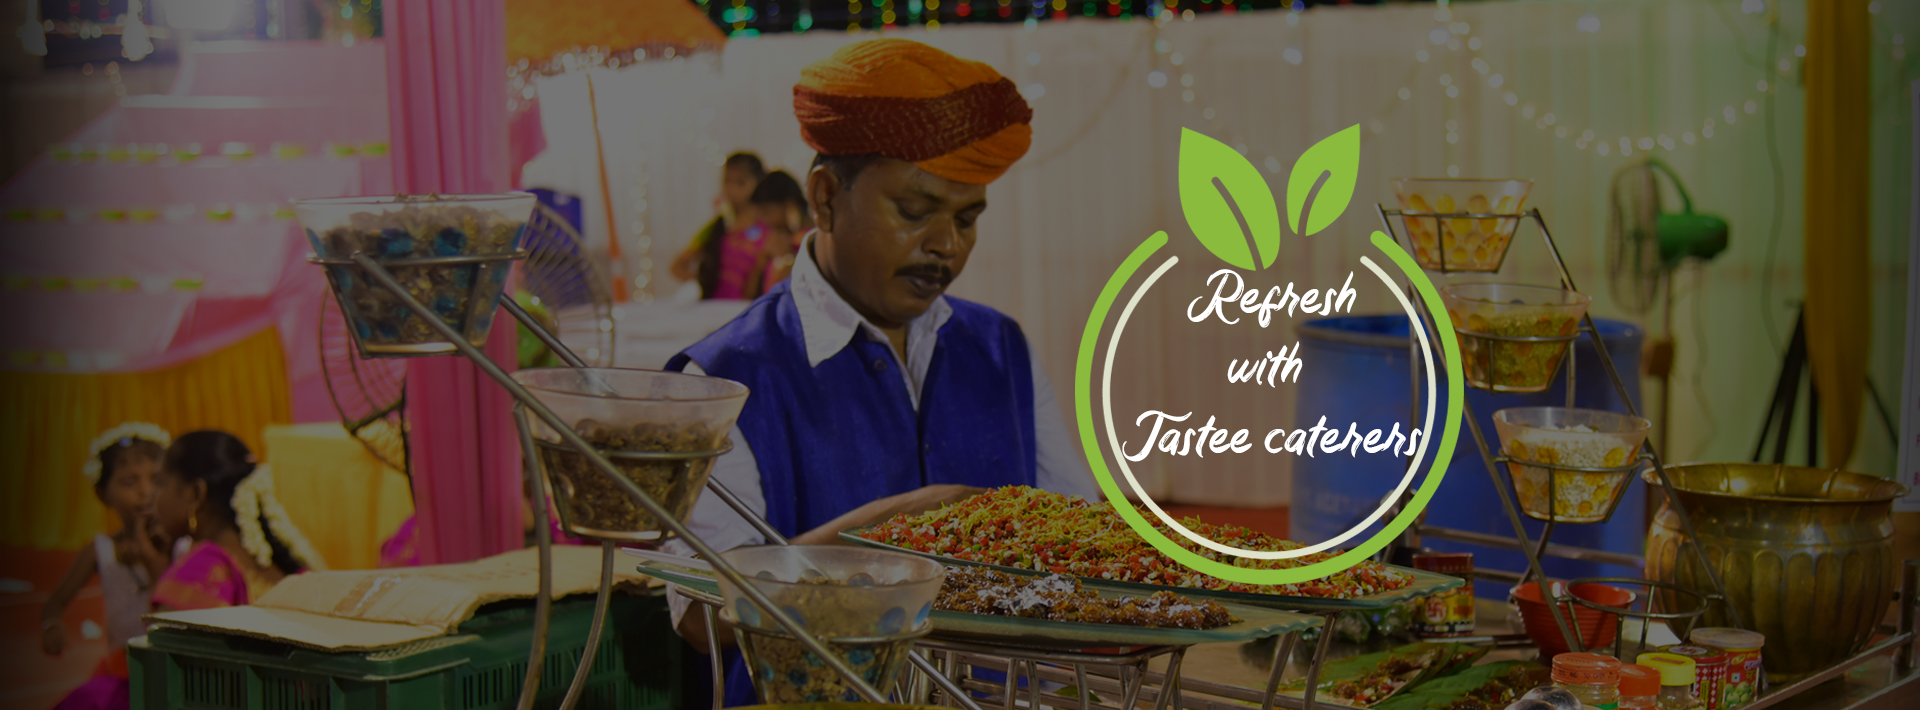 Pure Veg Caterers Services in Chennai